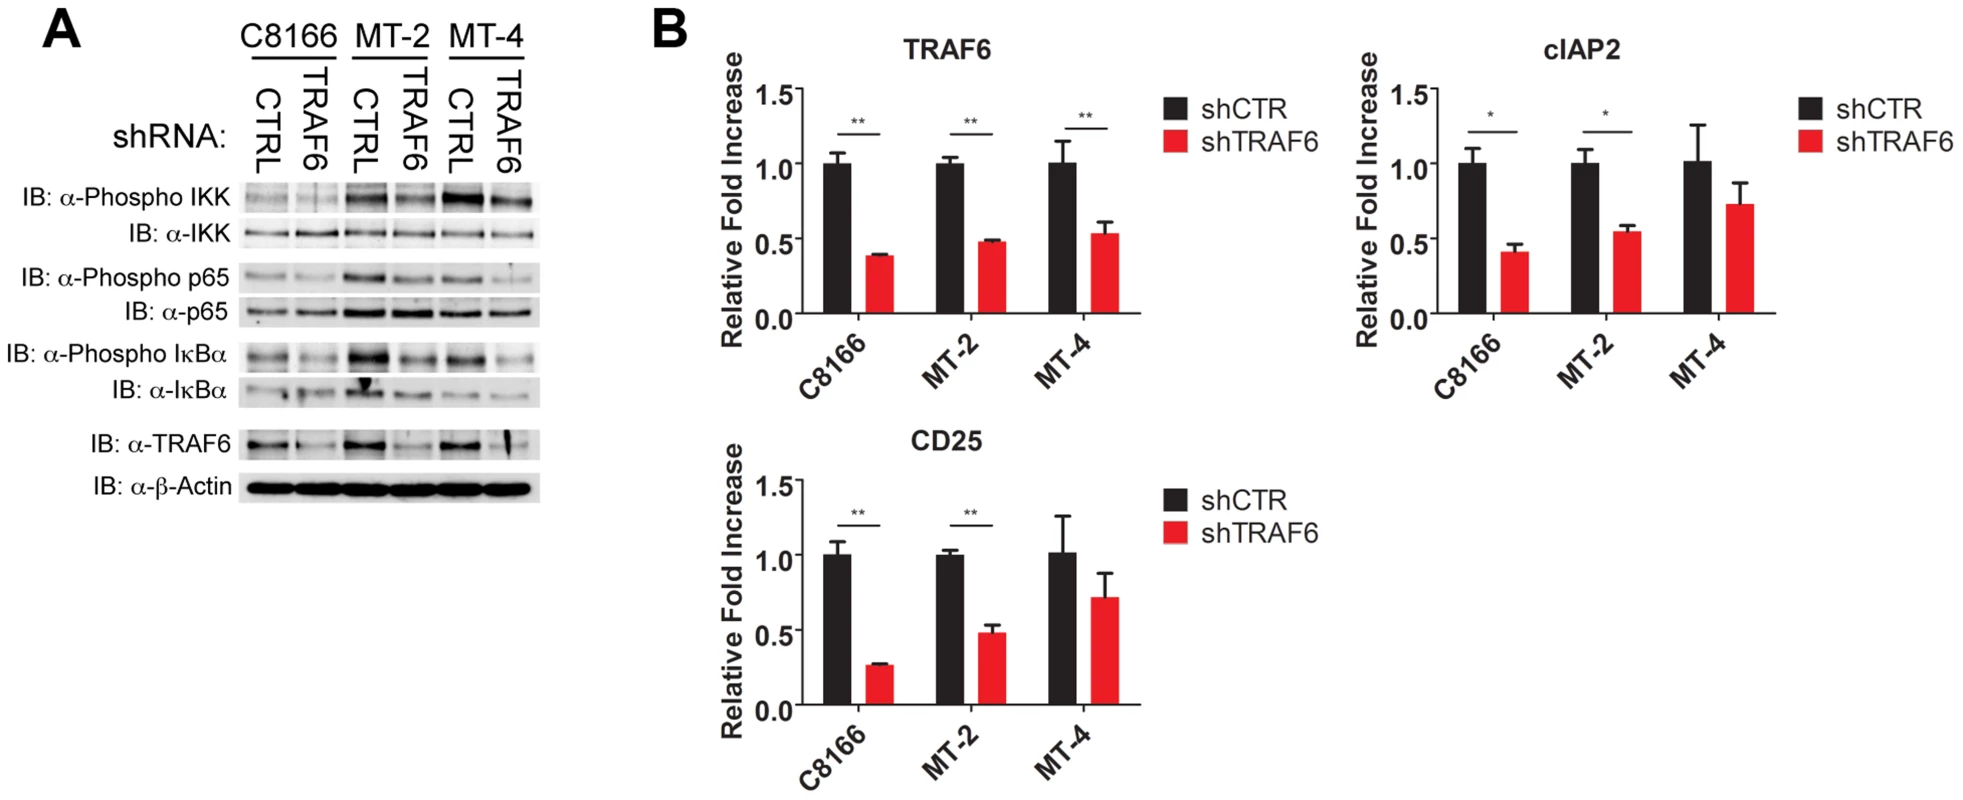 TRAF6 is required for NF-κB activation in HTLV-1 transformed T cells.